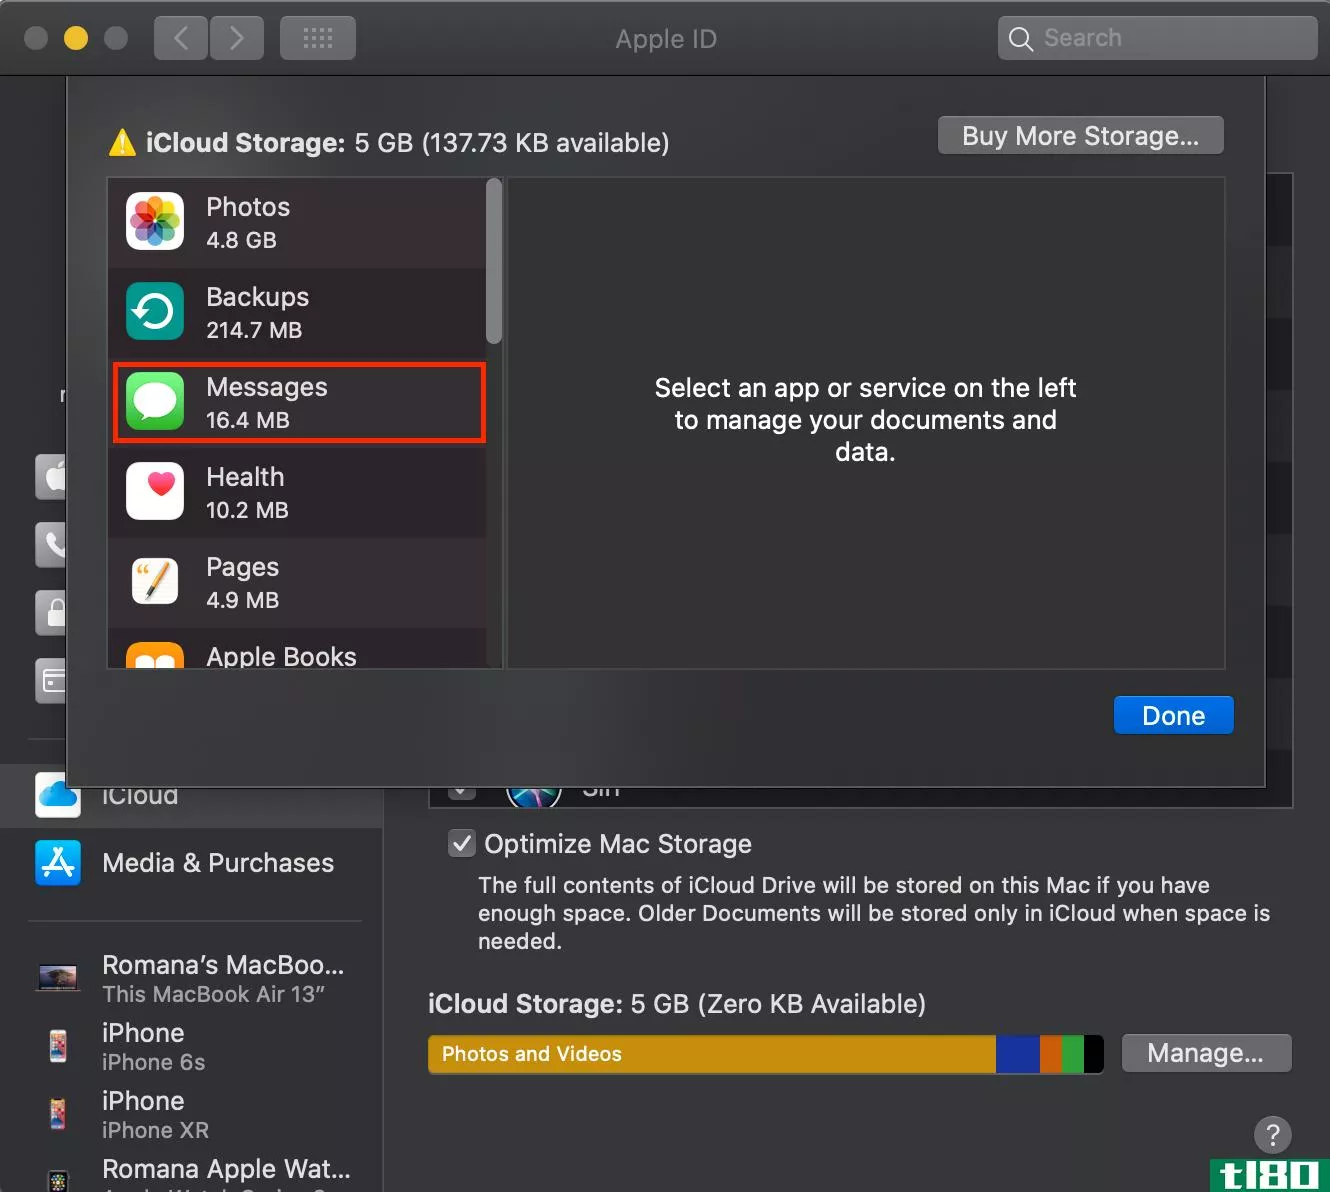 how much space is the messages app using on Mac 